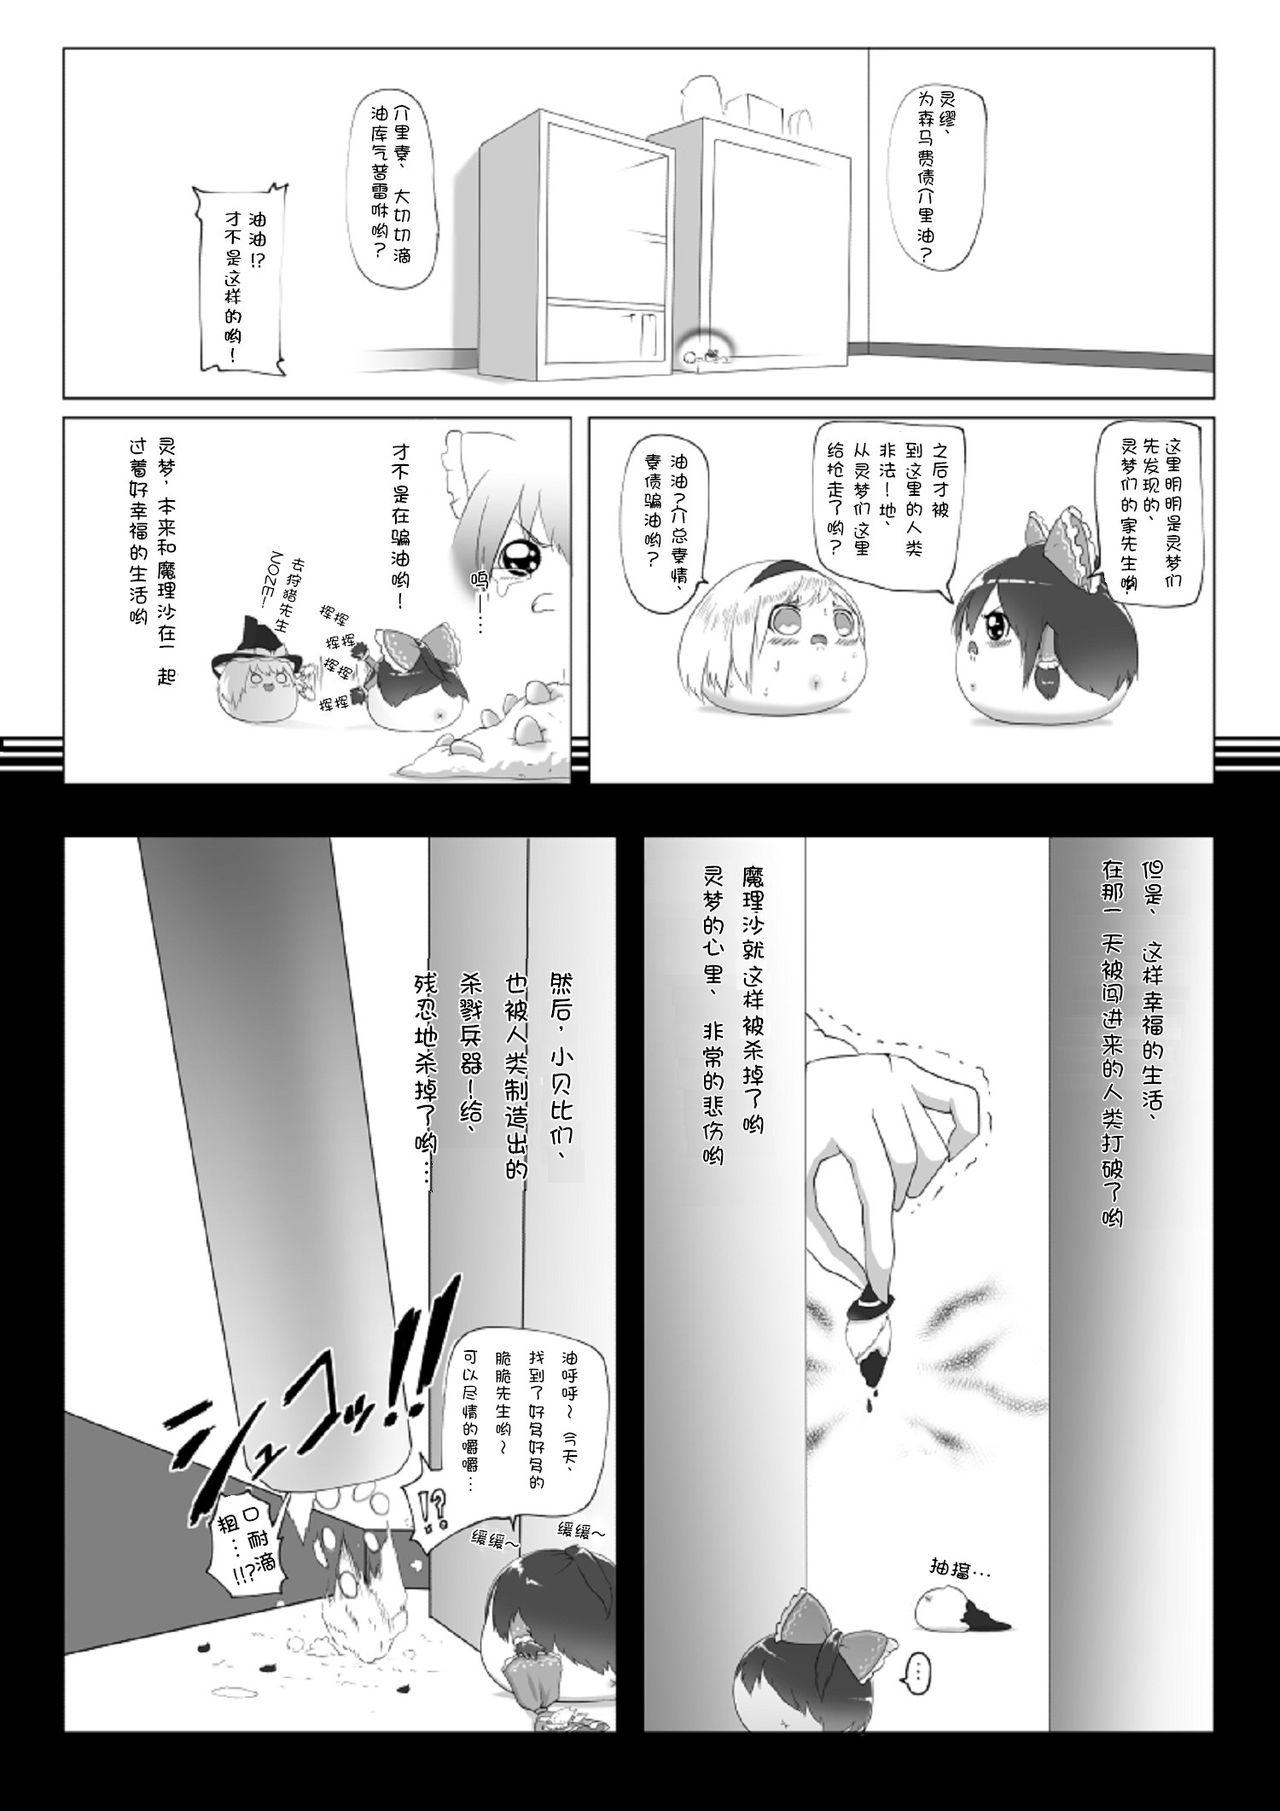 3way ゆっくりがかってにはえてくるわけ（Chinese) - Touhou project Tittyfuck - Page 5